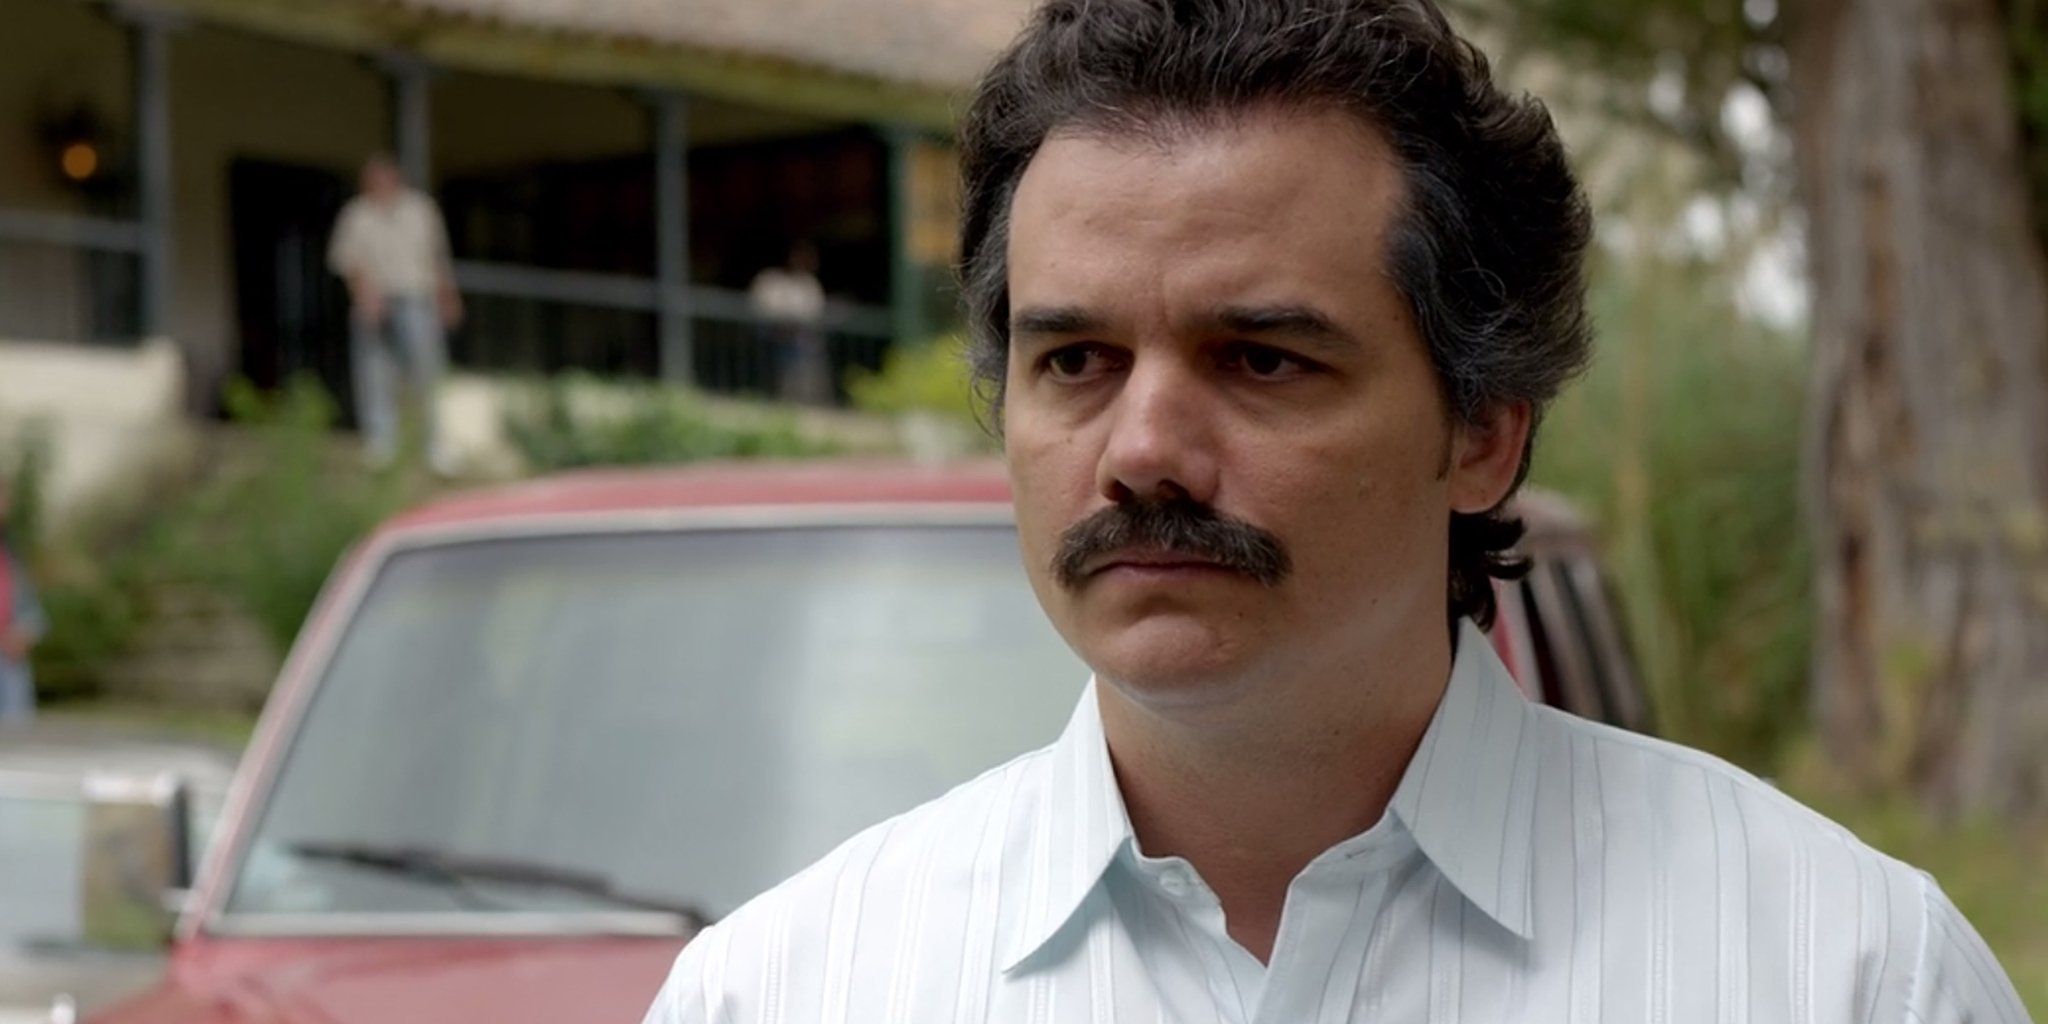 Wagner Moura on Narcos's unreal real-life plot: 'Did this really happen?